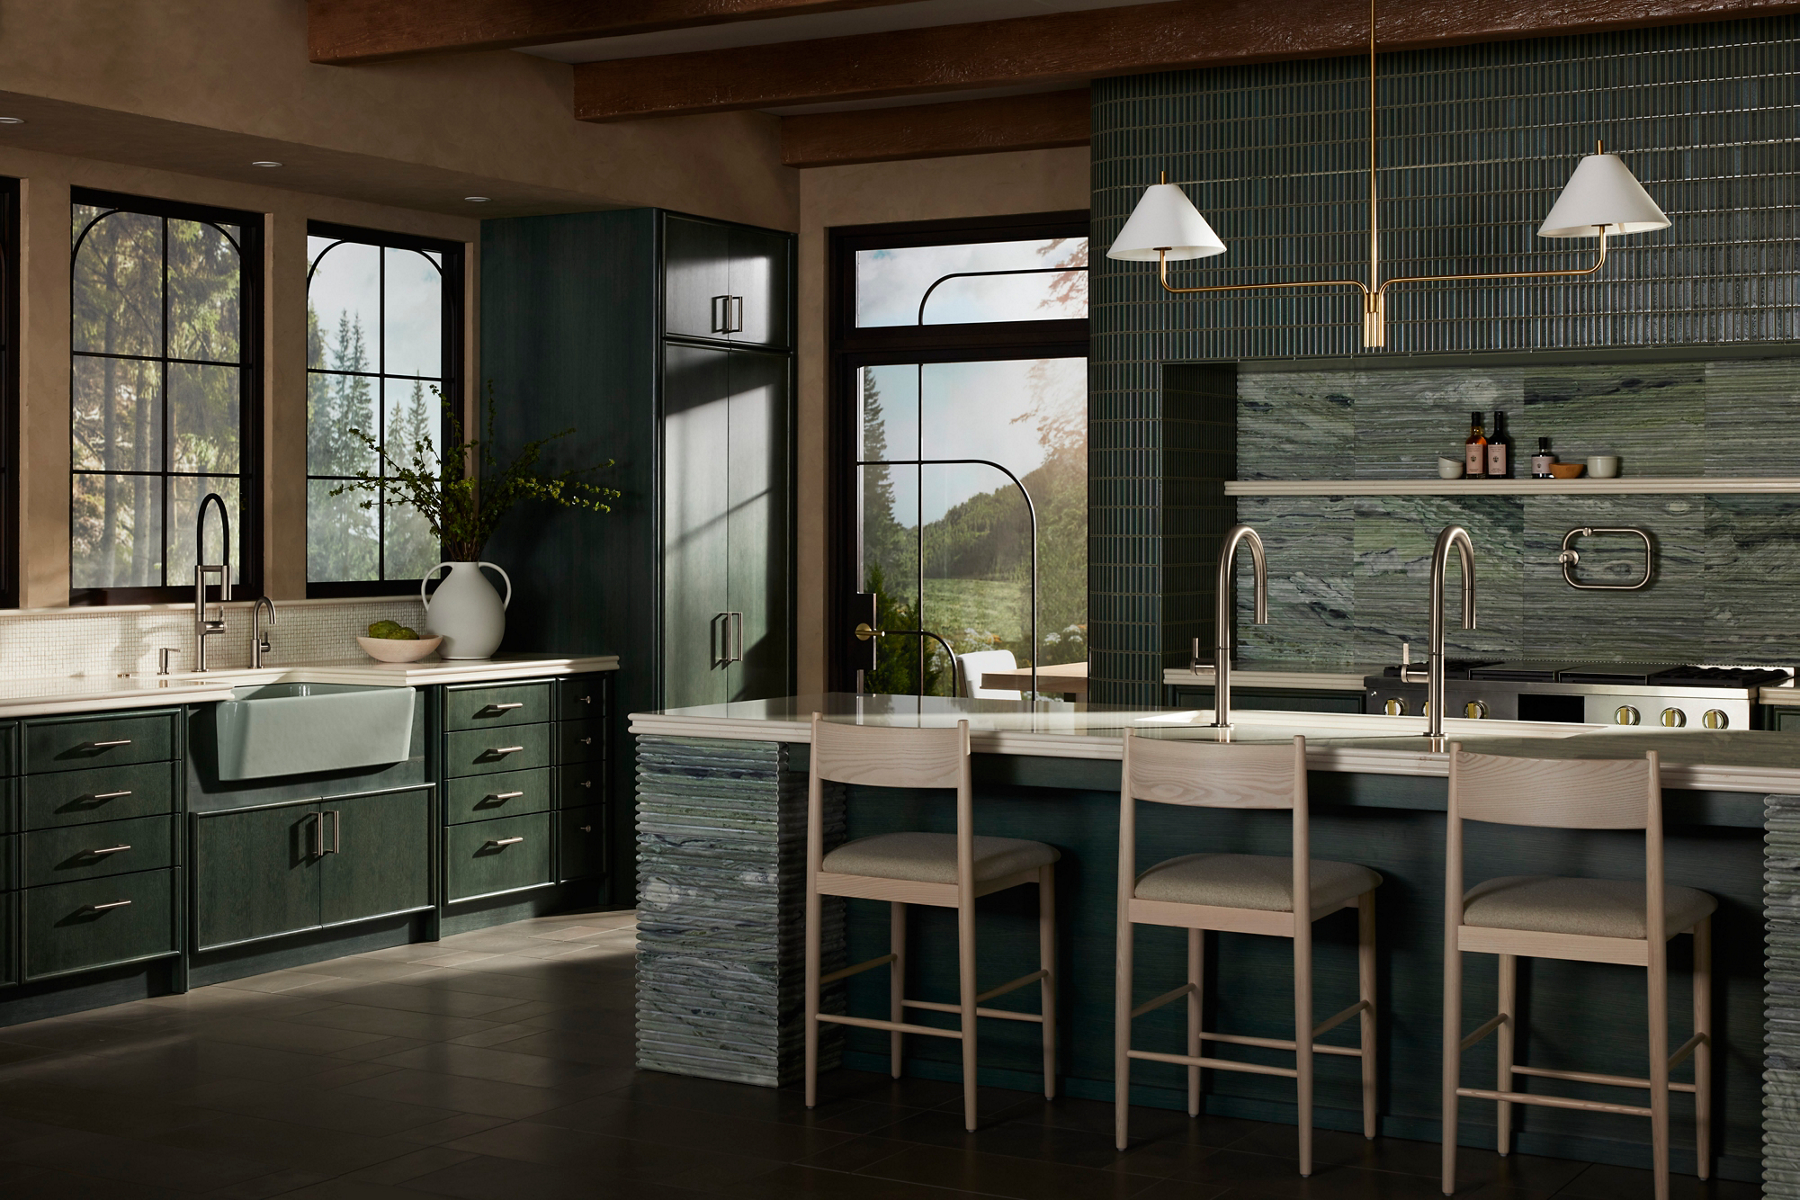 A wide lifestyle image of a sundrenched kitchen designed with dark moss green tiling and beige textured walls. There's a kitchen island at focus with a double silver sink faucet faced away from the camera. Behind the island is a kitchen counter with a silver stove and decorative shelf above. To the leftside of the image is another kitchen sink designed with a muted mint green body and silver faucets.